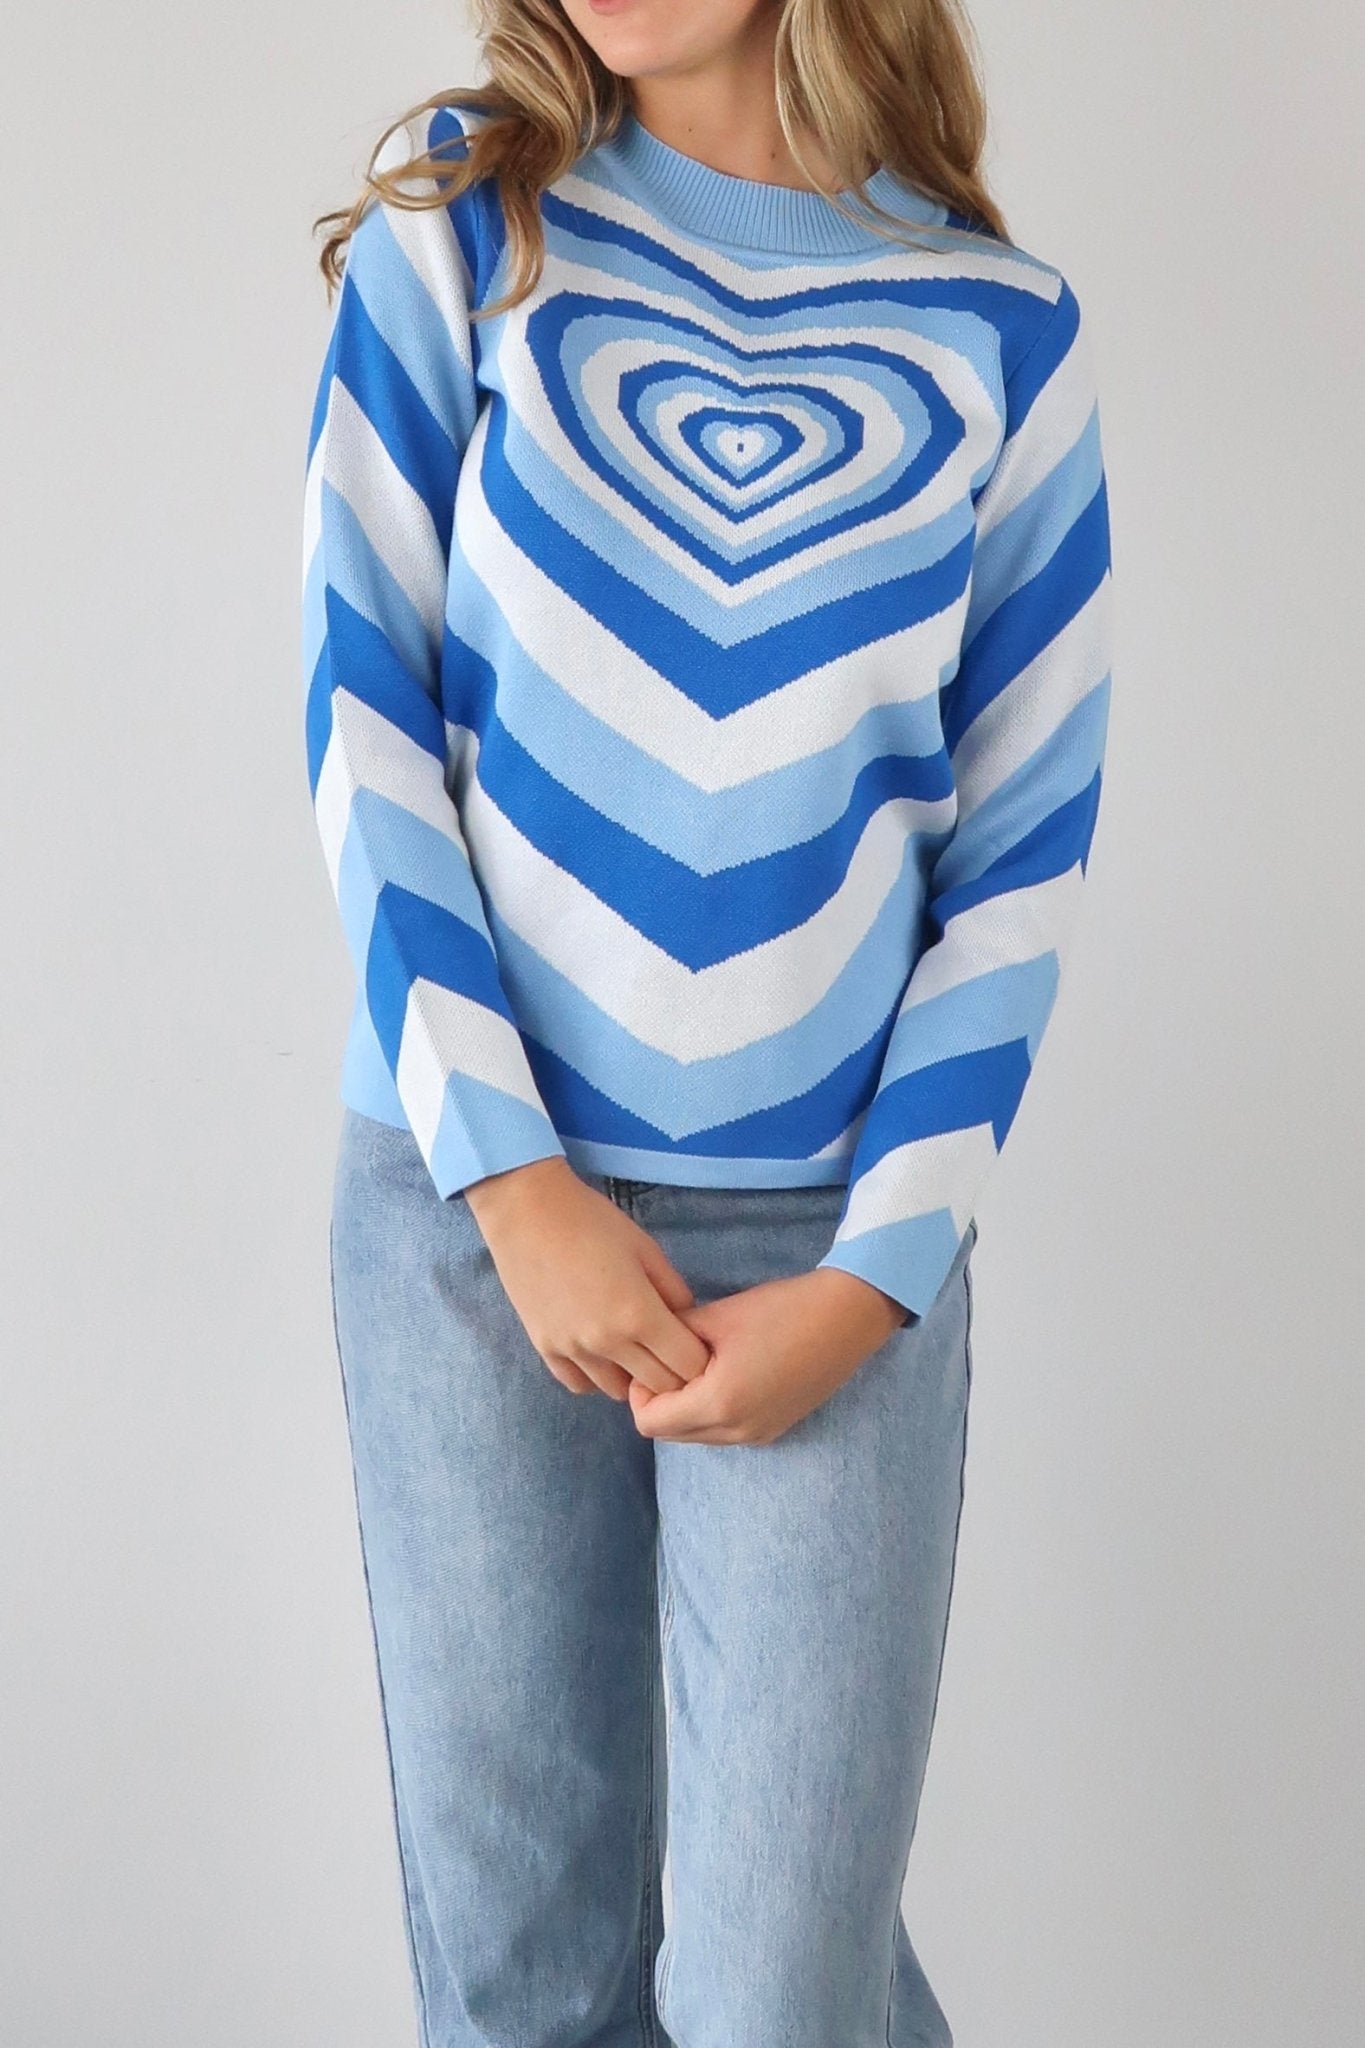 Indie vibe heart pattern jumper - SCG_COLLECTIONSsweater